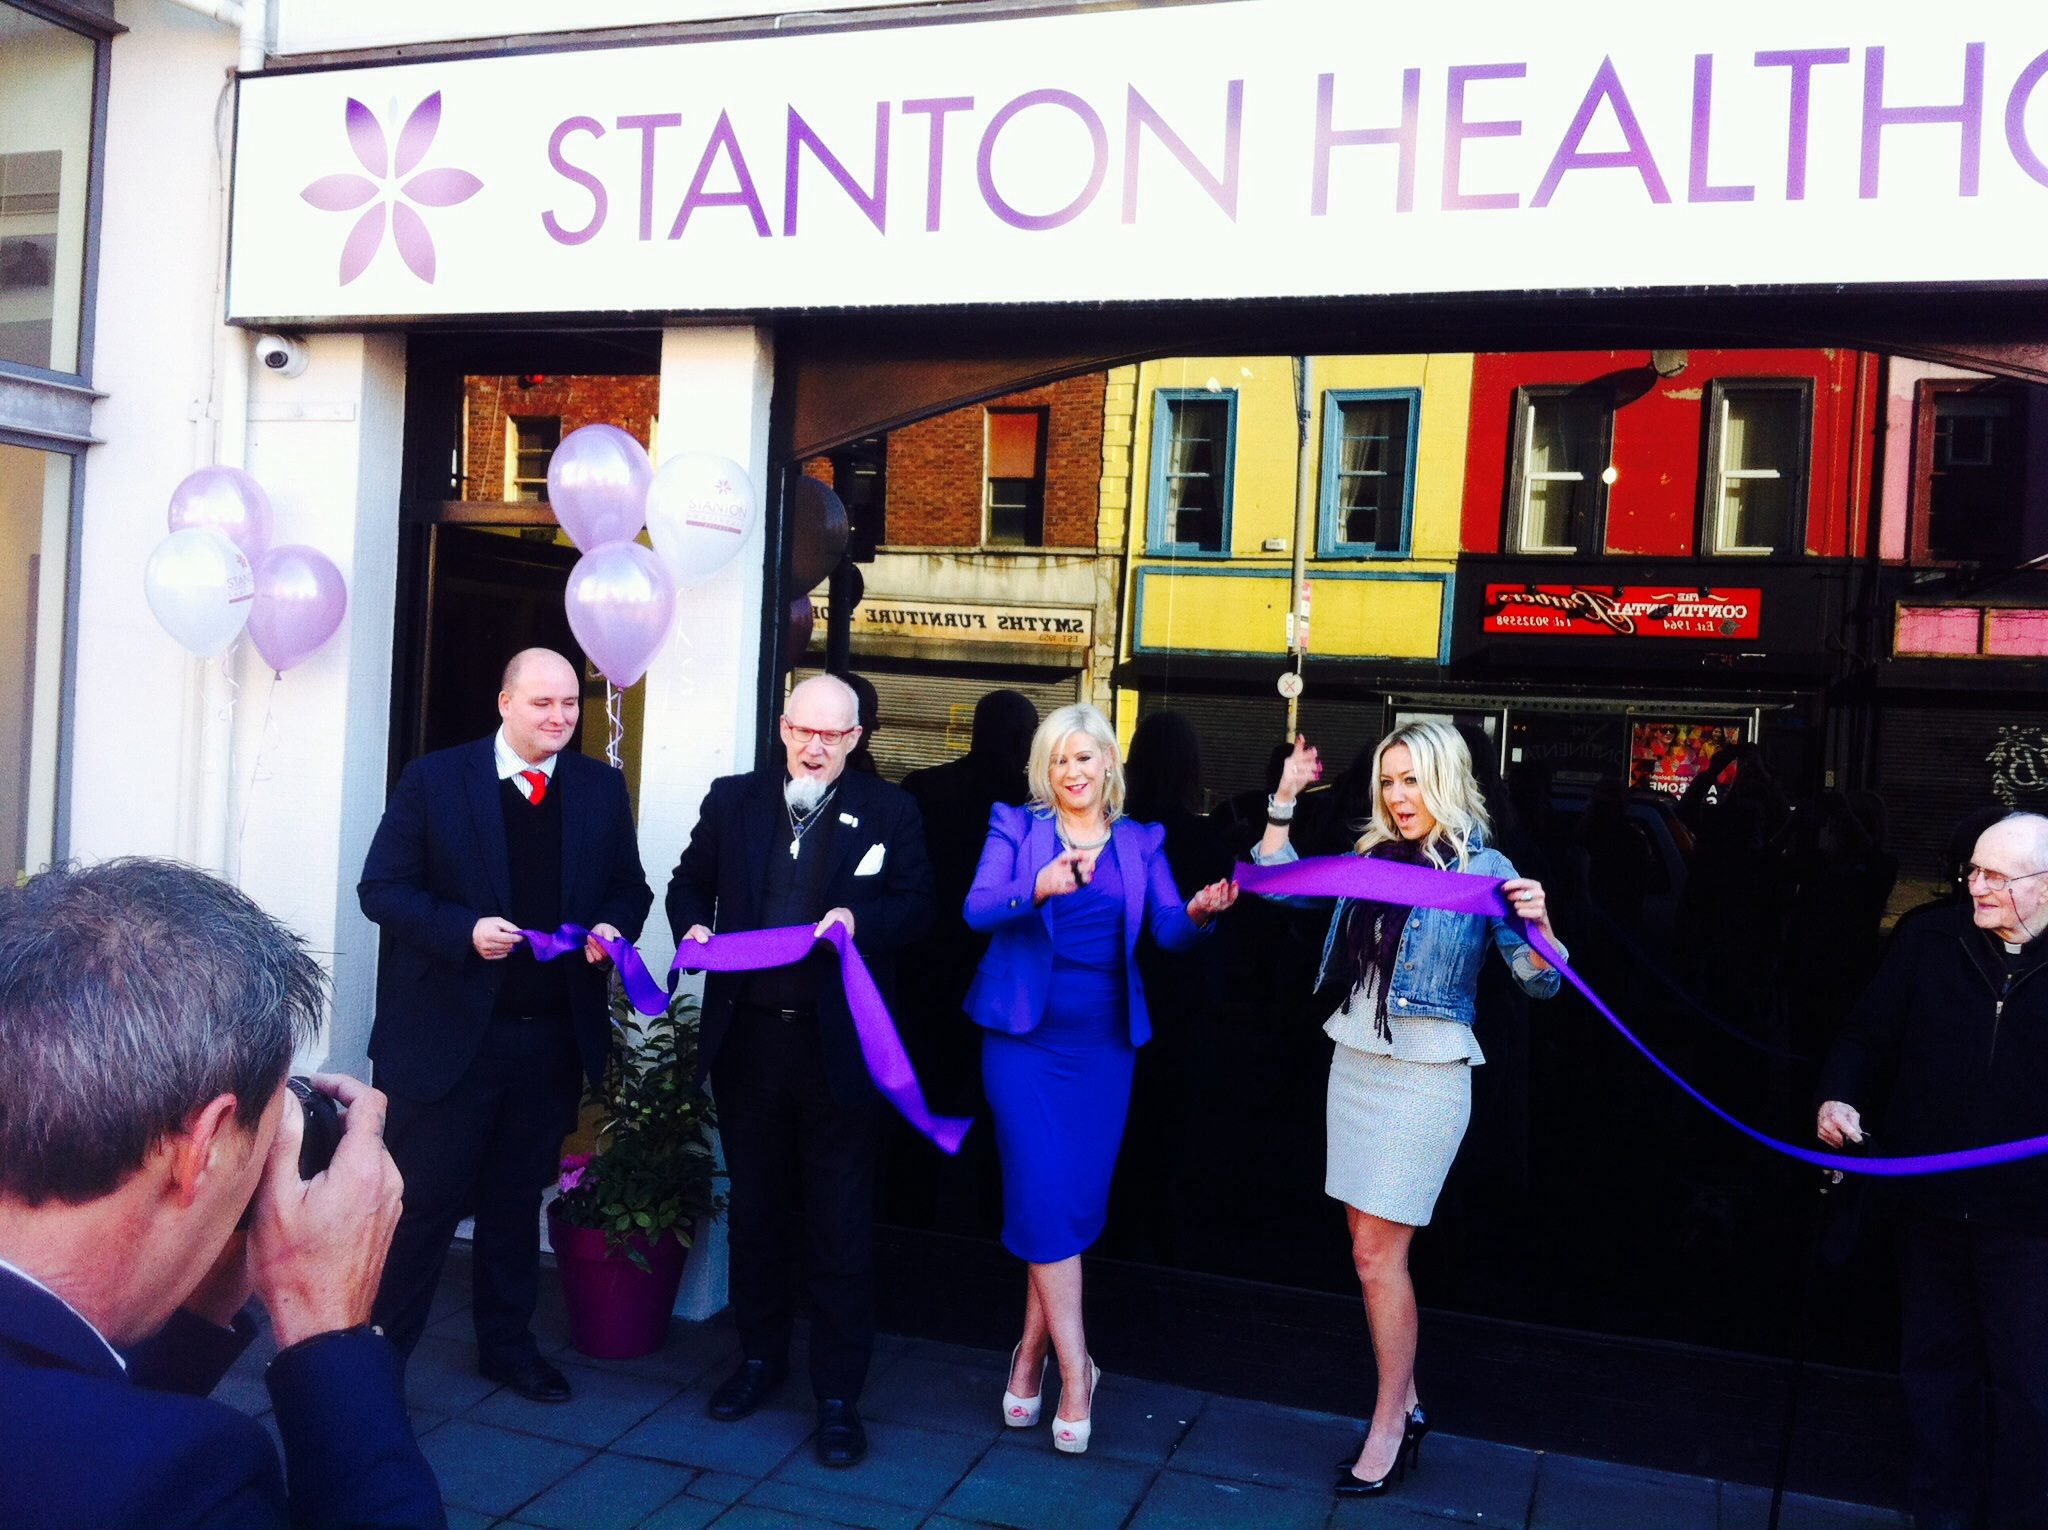 And the purple ribbon has been cut! Another life-affirming clinic is open and offering care to expectant mothers.